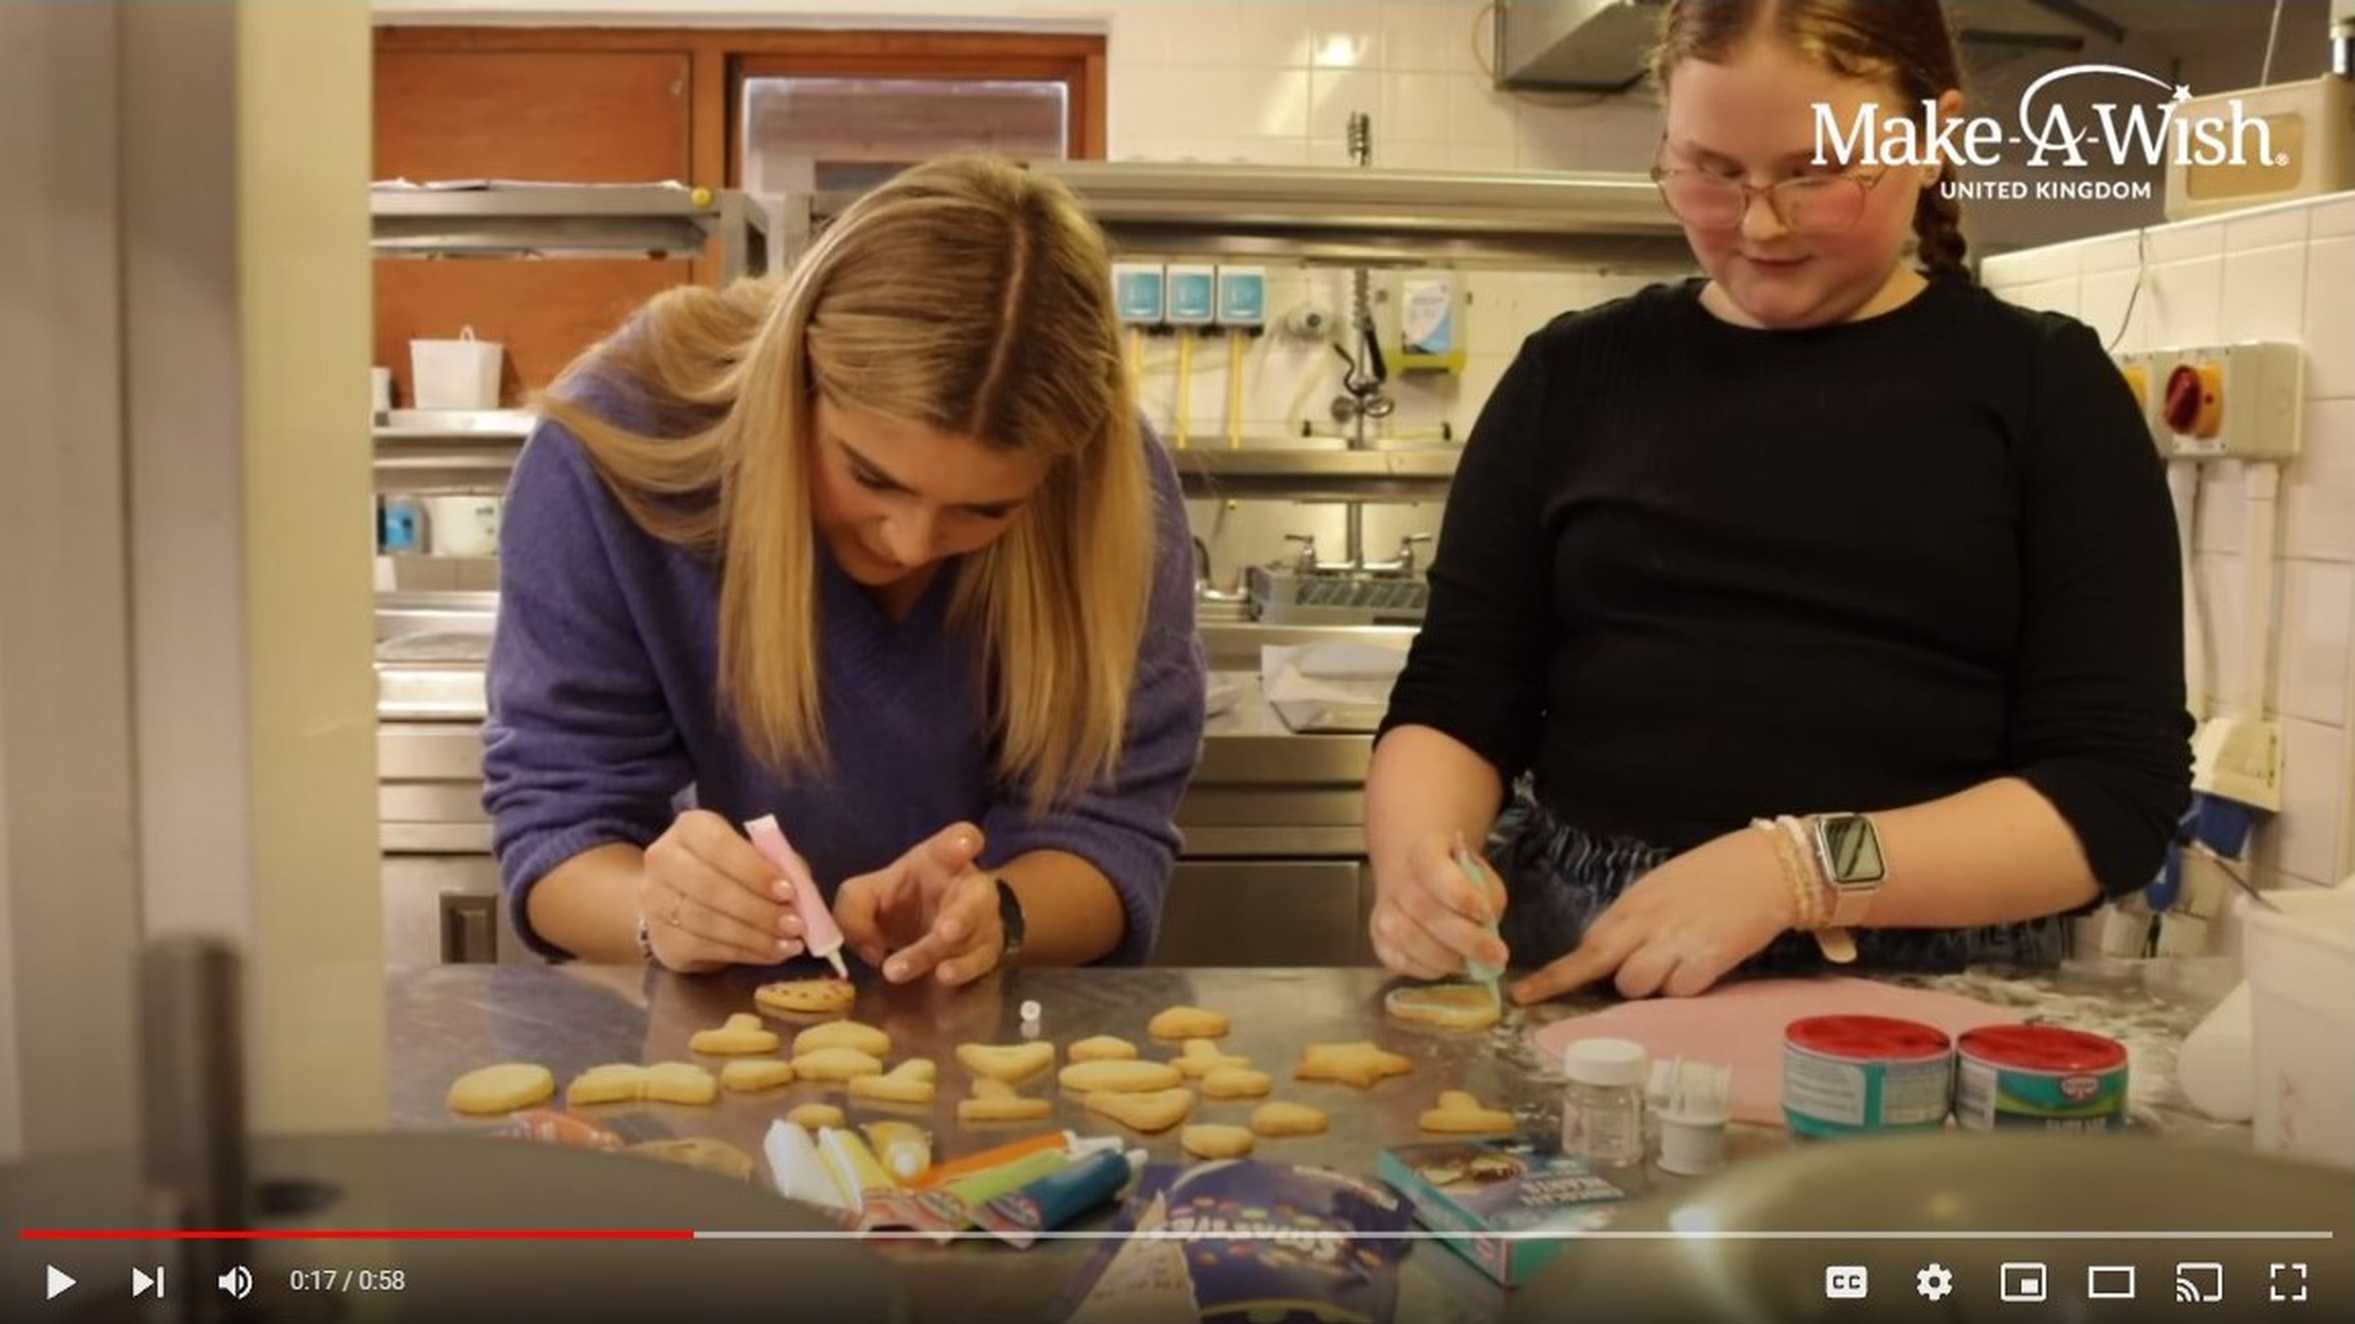 Abbie and Tilly icing some cookies they baked together.